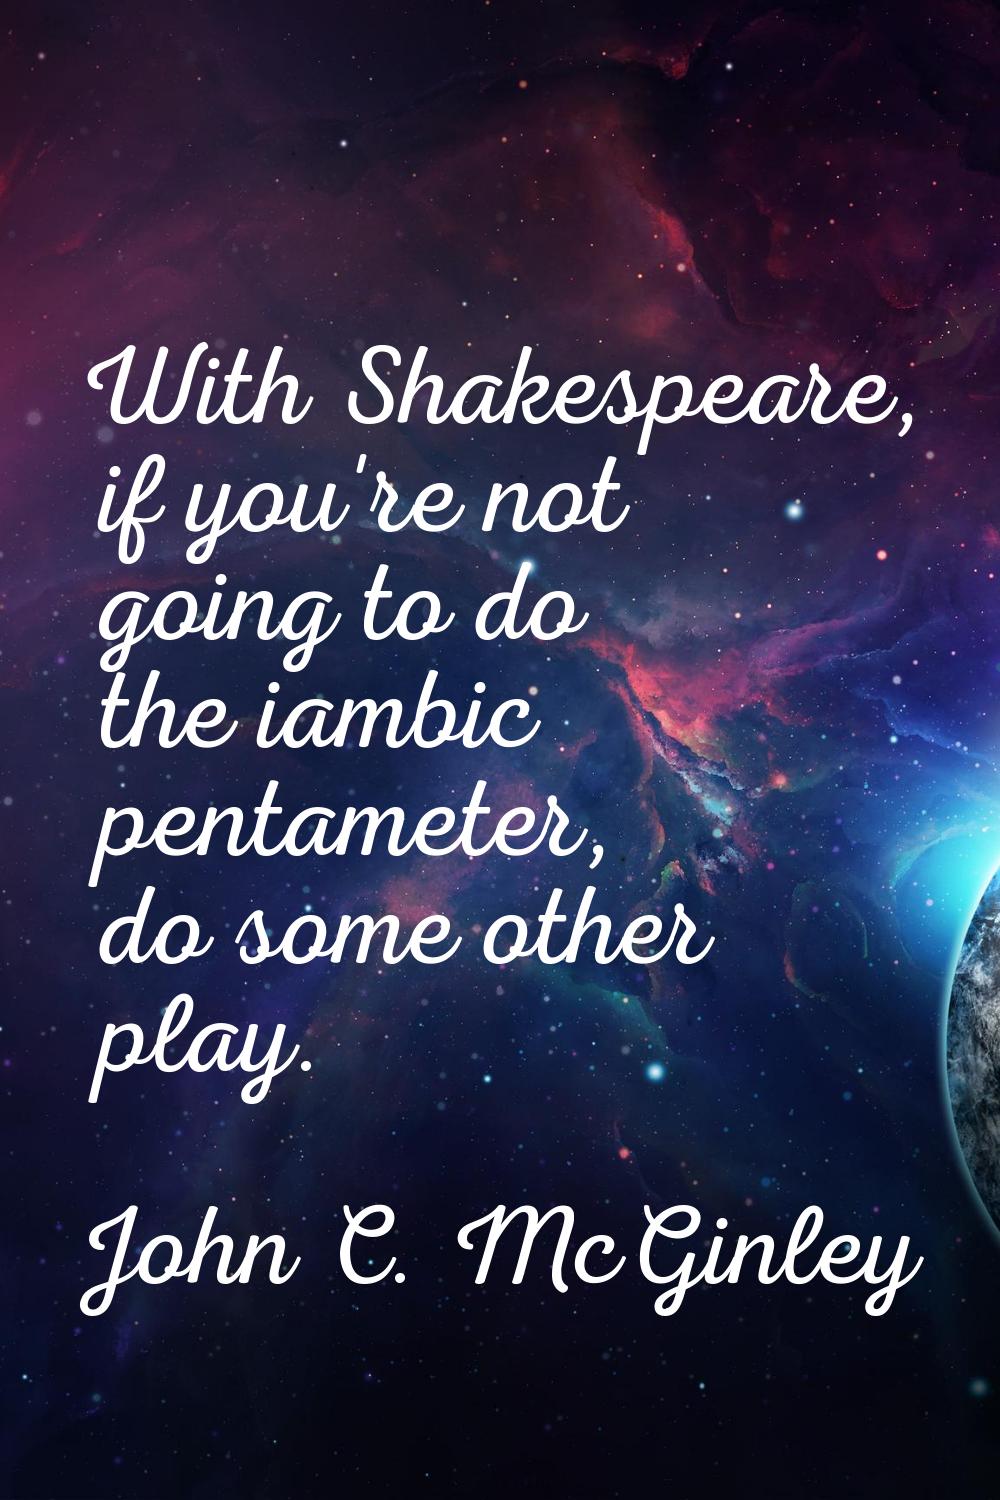 With Shakespeare, if you're not going to do the iambic pentameter, do some other play.